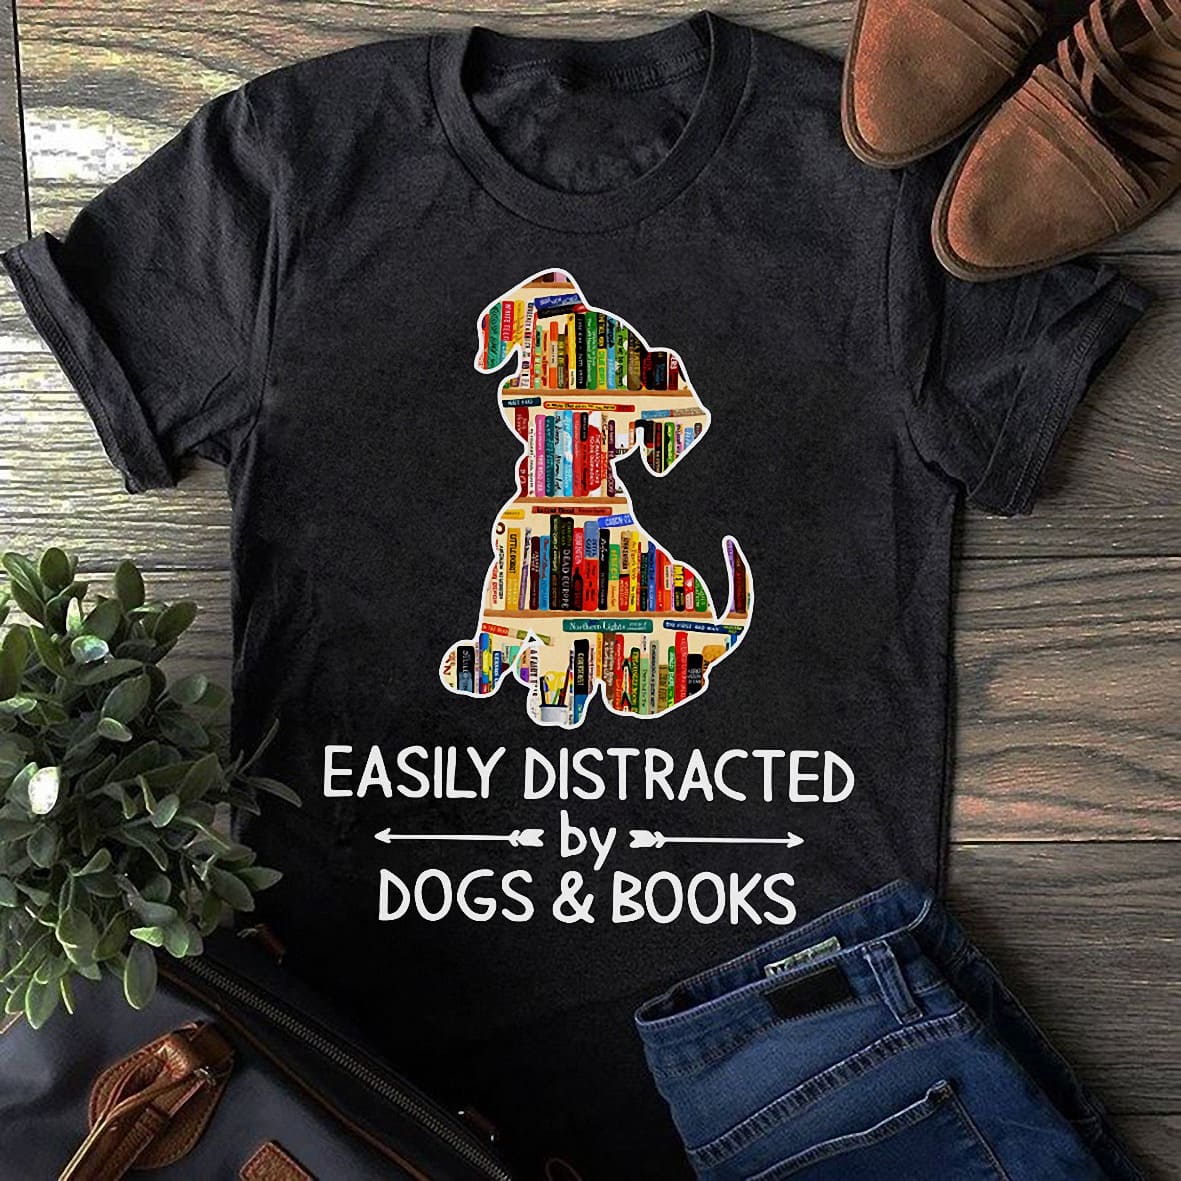 Dogs And Books Dog Gift Books Shirt Gift For Friends Easily Distracted By Dogs And Books Shirt Dogs Shirt